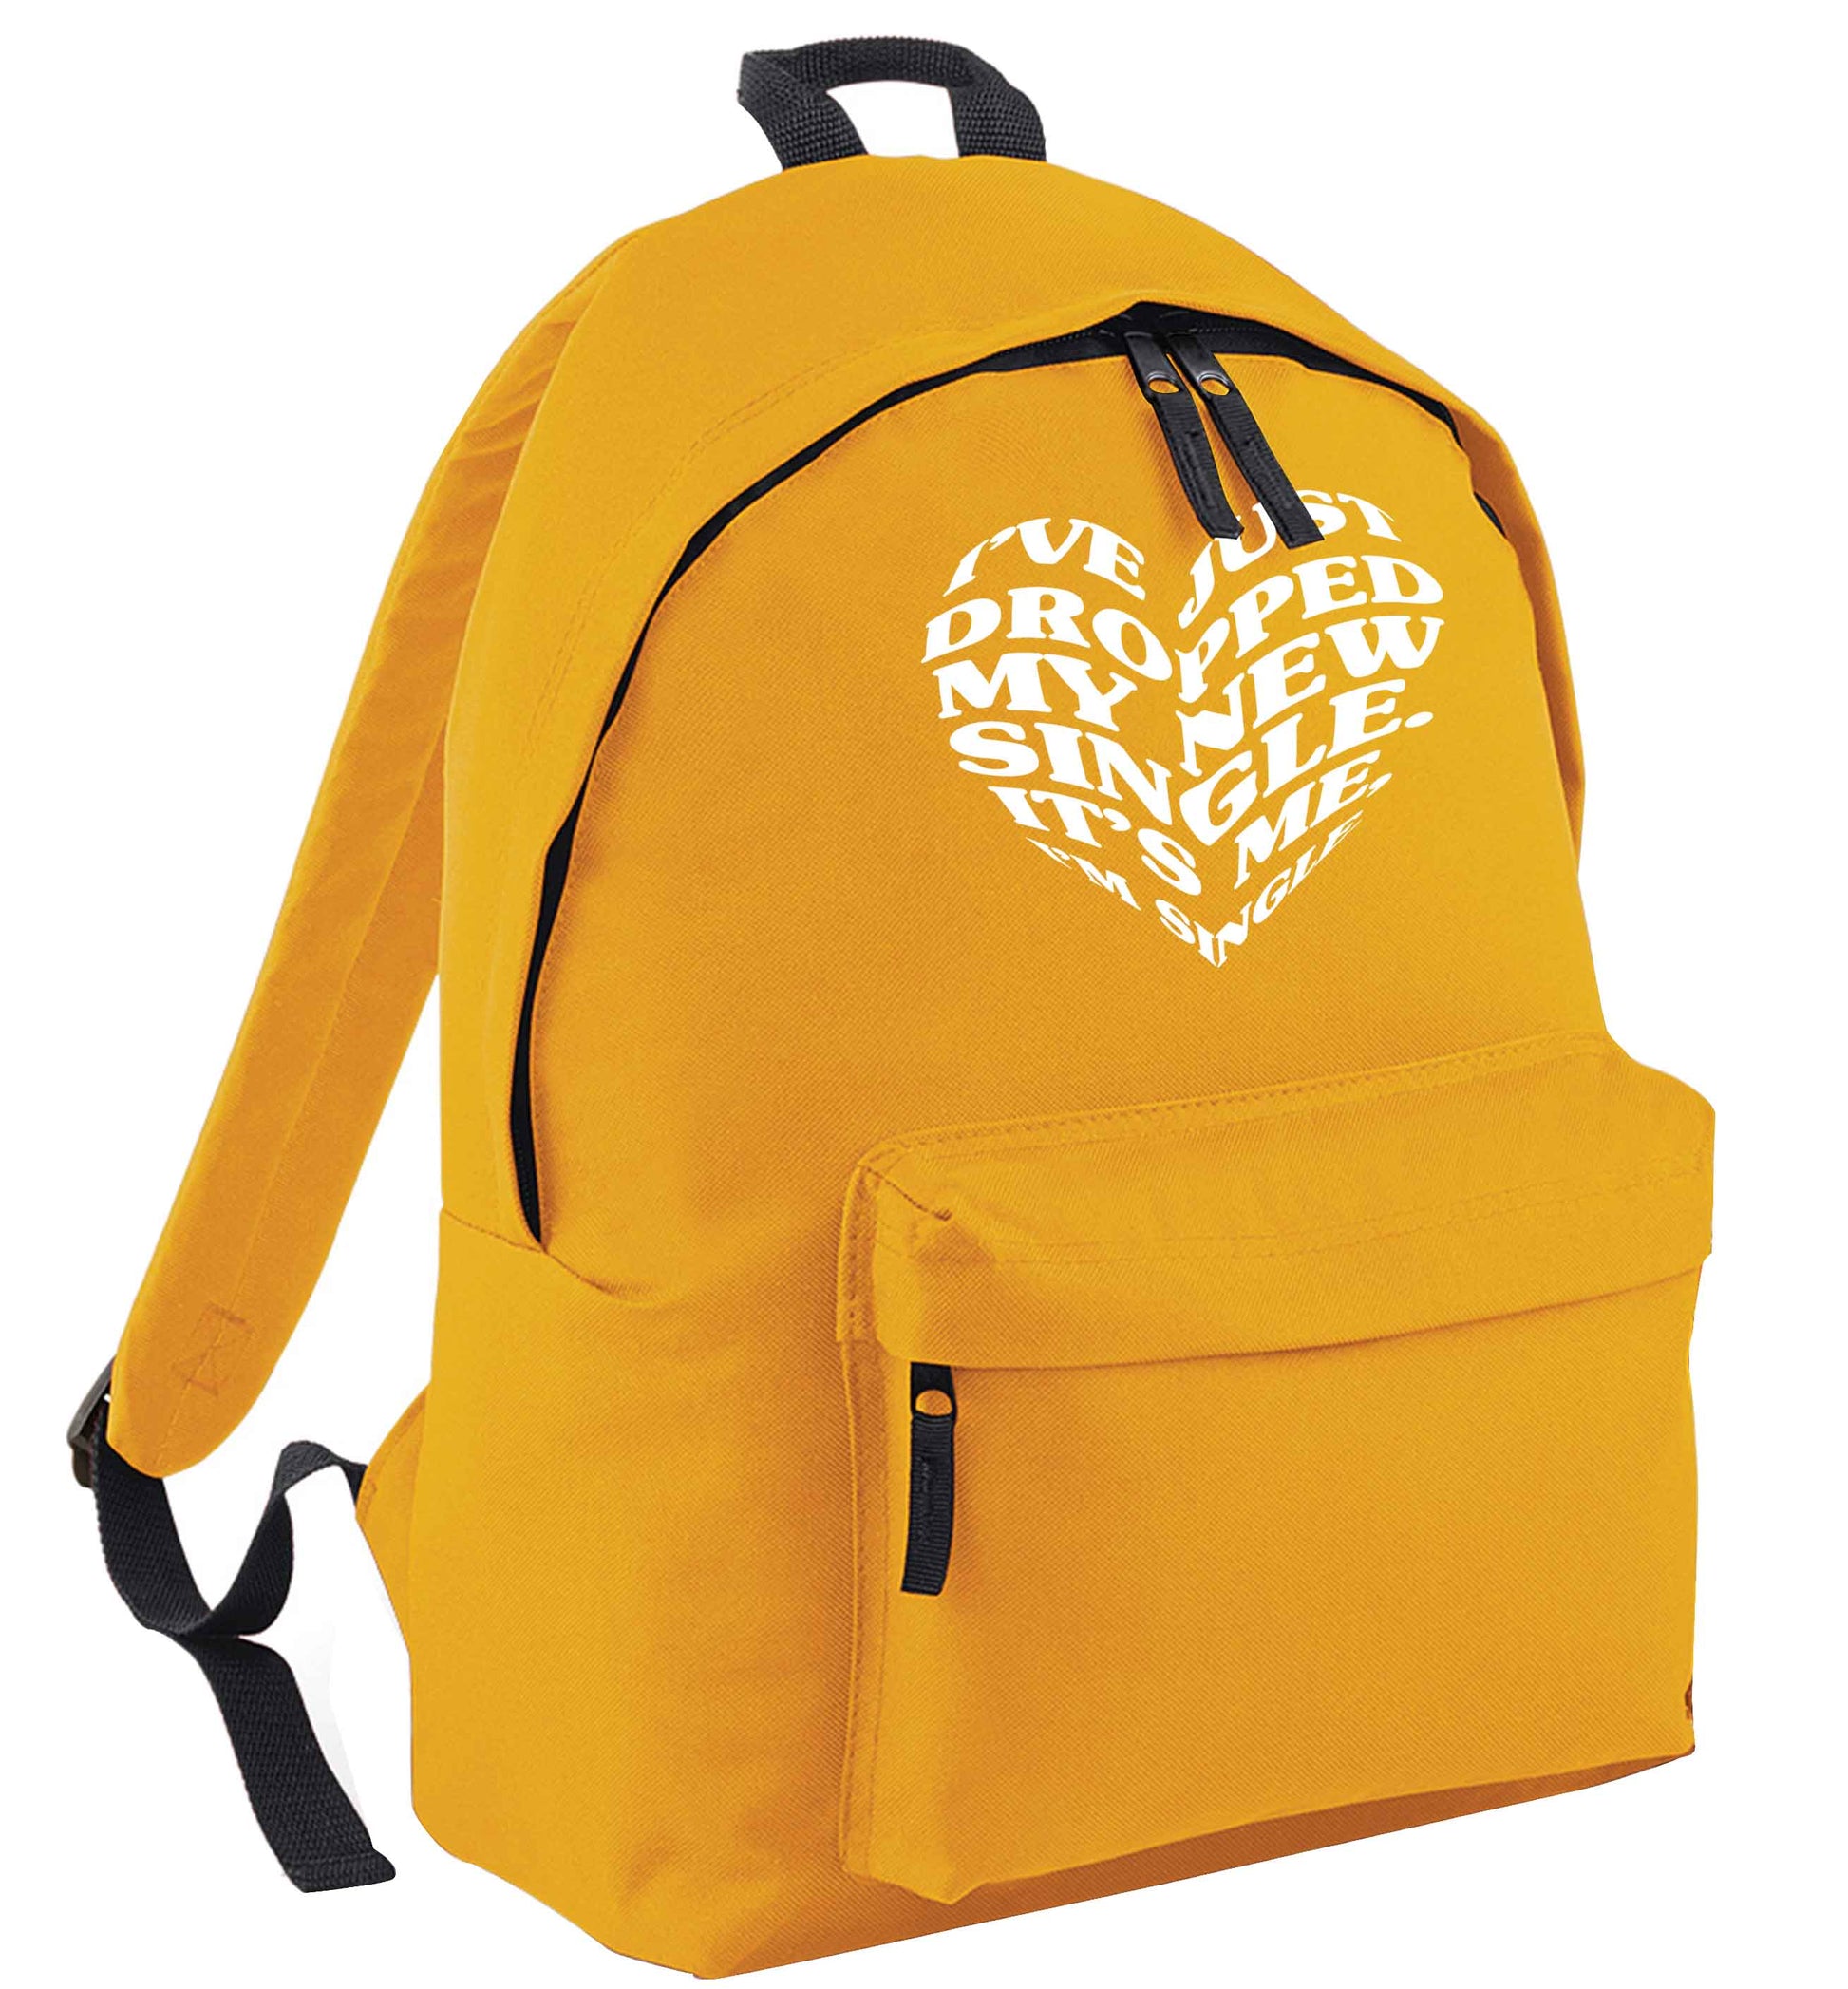 I've just dropped my new single it's me I'm single mustard adults backpack